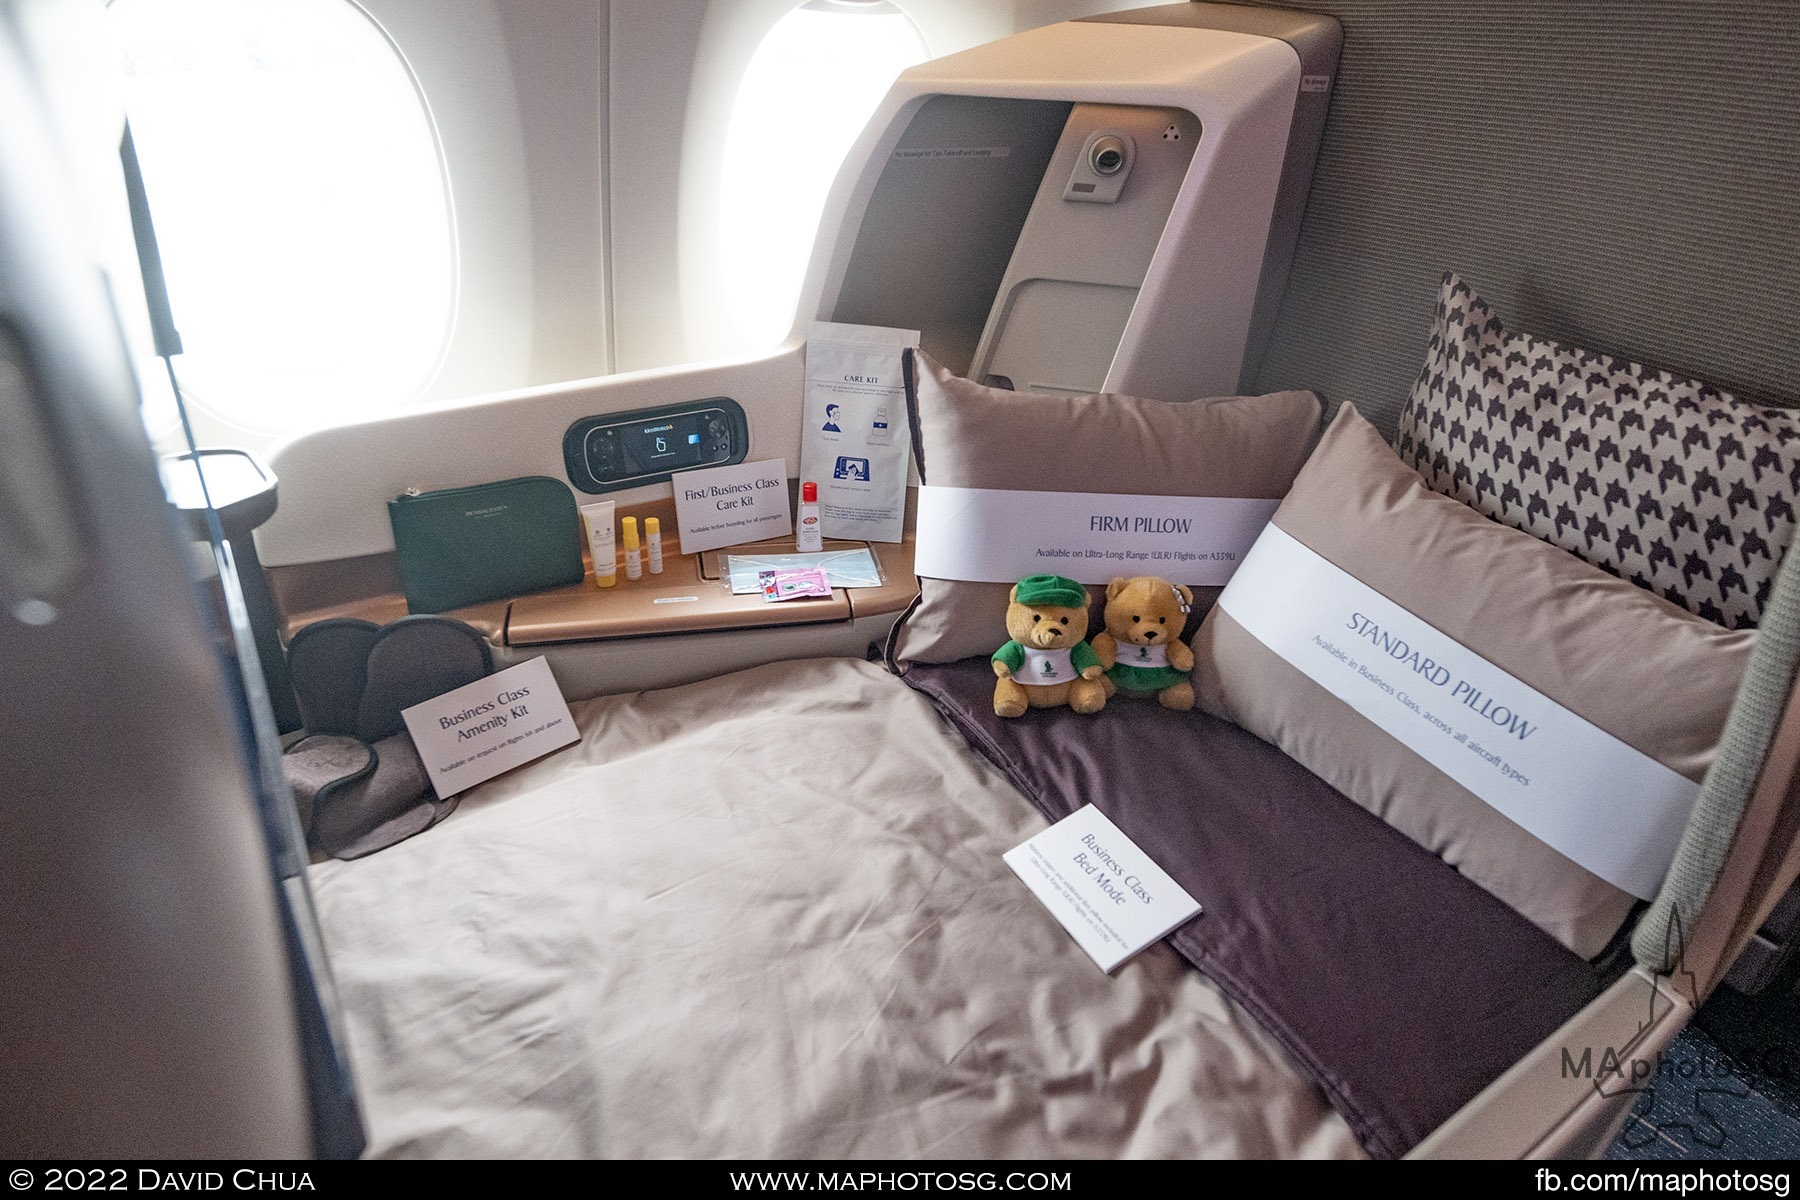 Singapore Airlines A350 Business Class Seat in bed mode